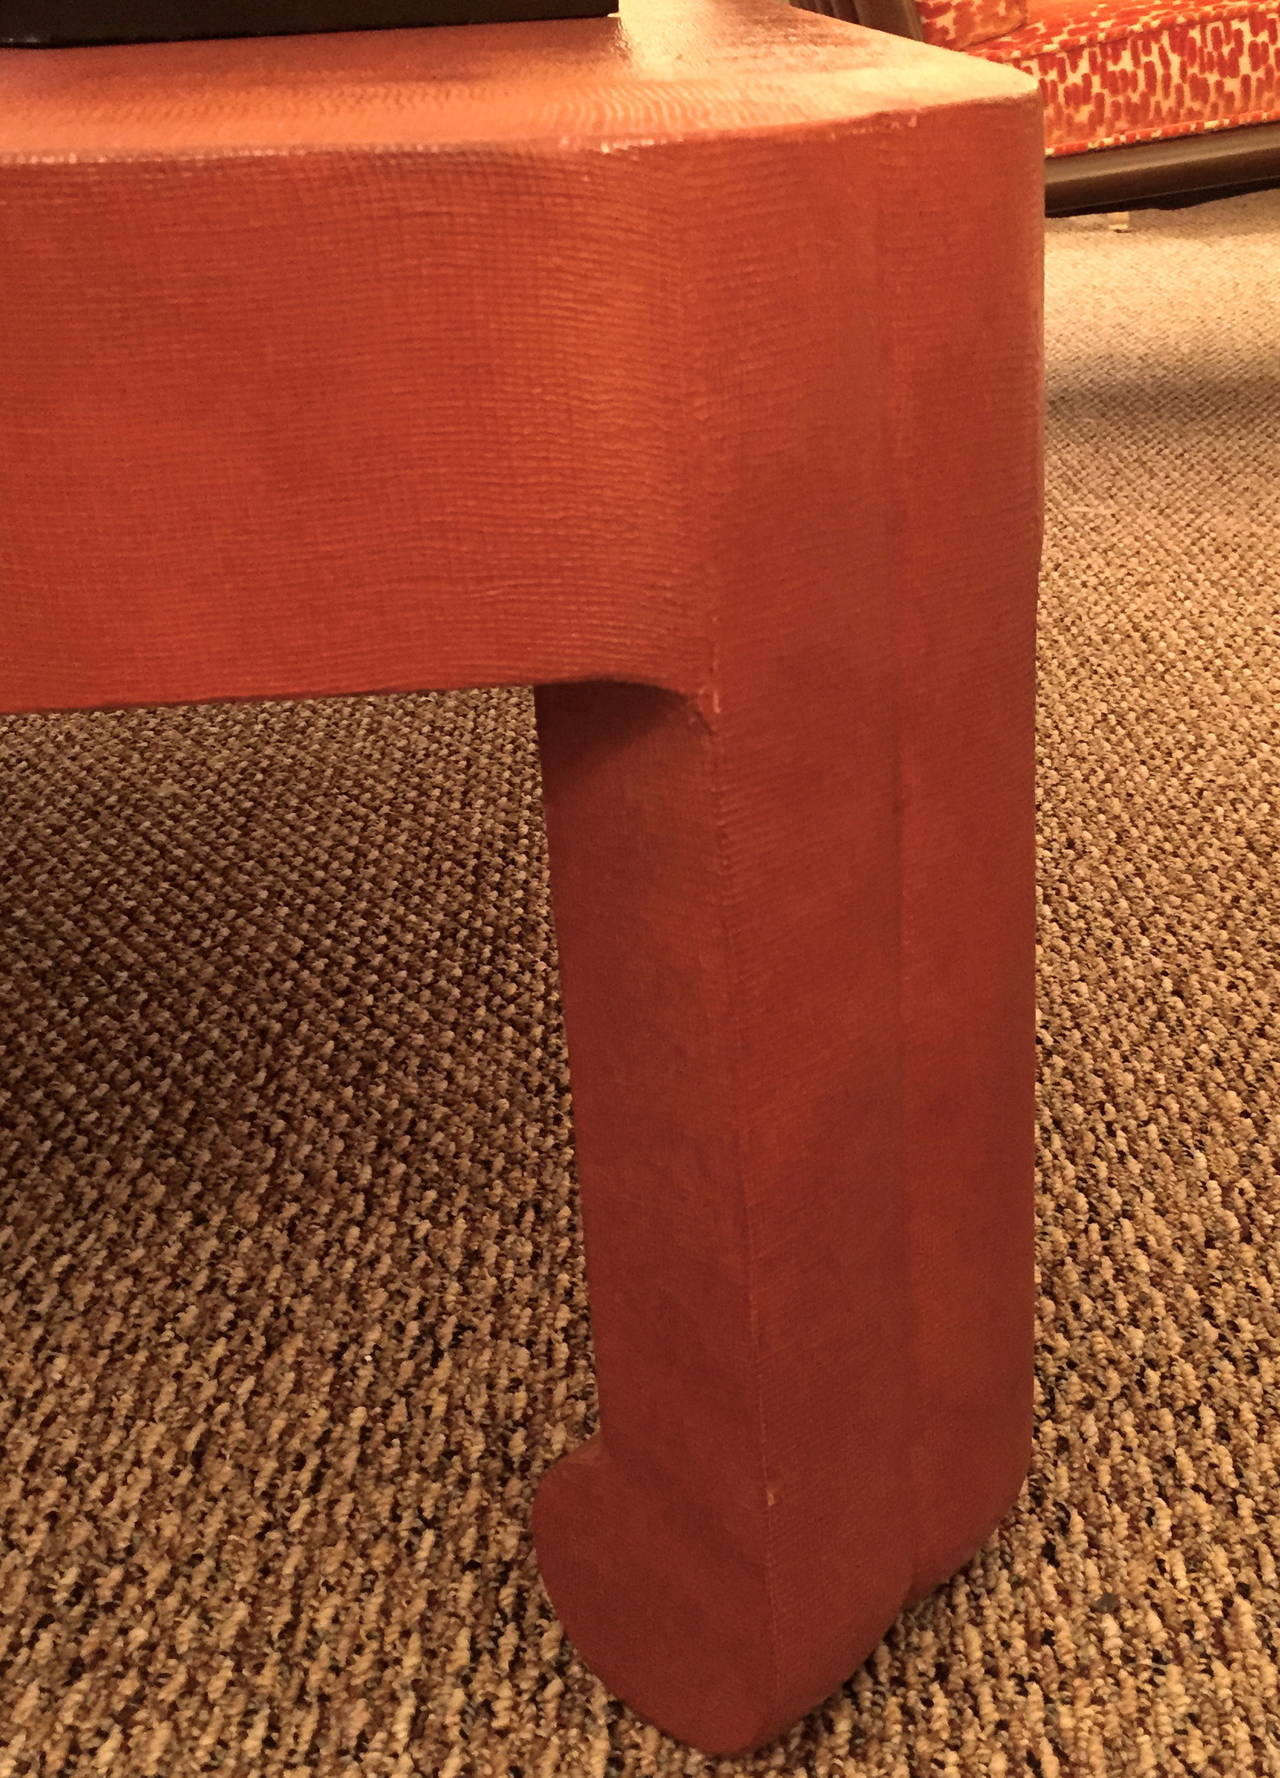 The late Mark Hampton, a icon of American interior design, commissioned this linen wrapped low table for a client on Eastern Long Island. It is cinnabar red with an subtle overglaze of a slightly darker red to add depth. 

Please contact us